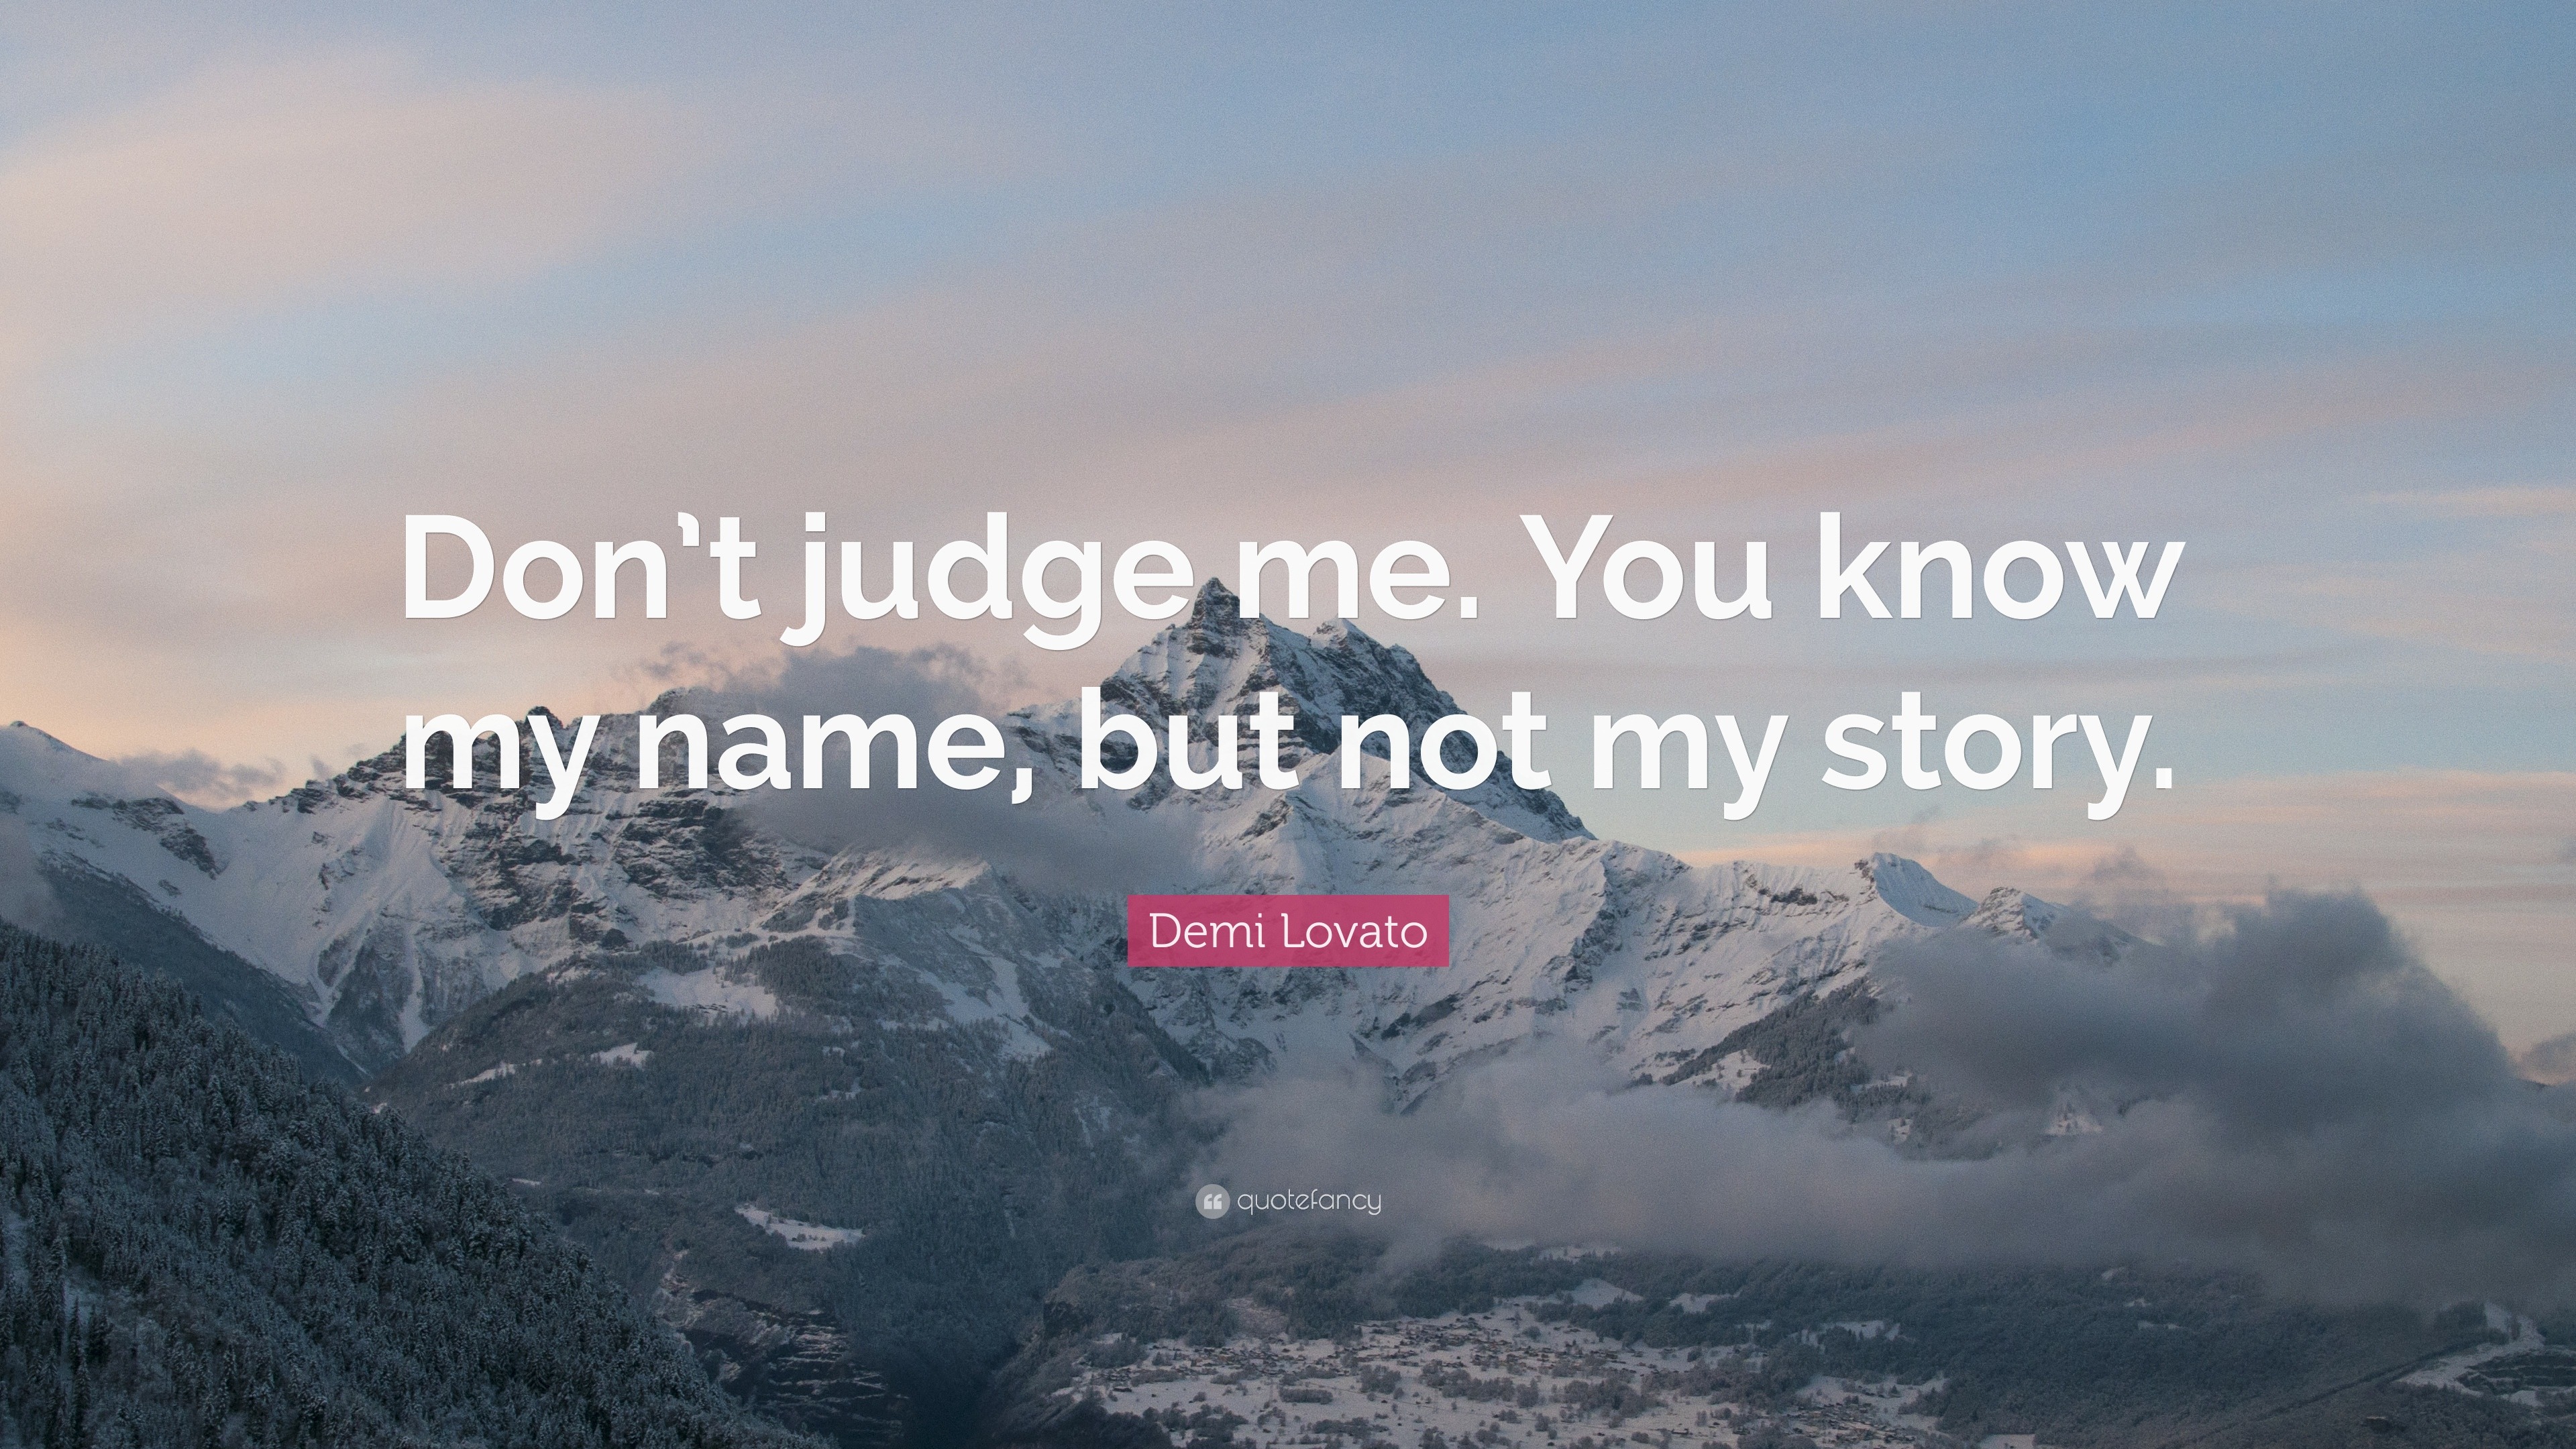 Demi Lovato Quote: “Don’t judge me. You know my name, but not my story